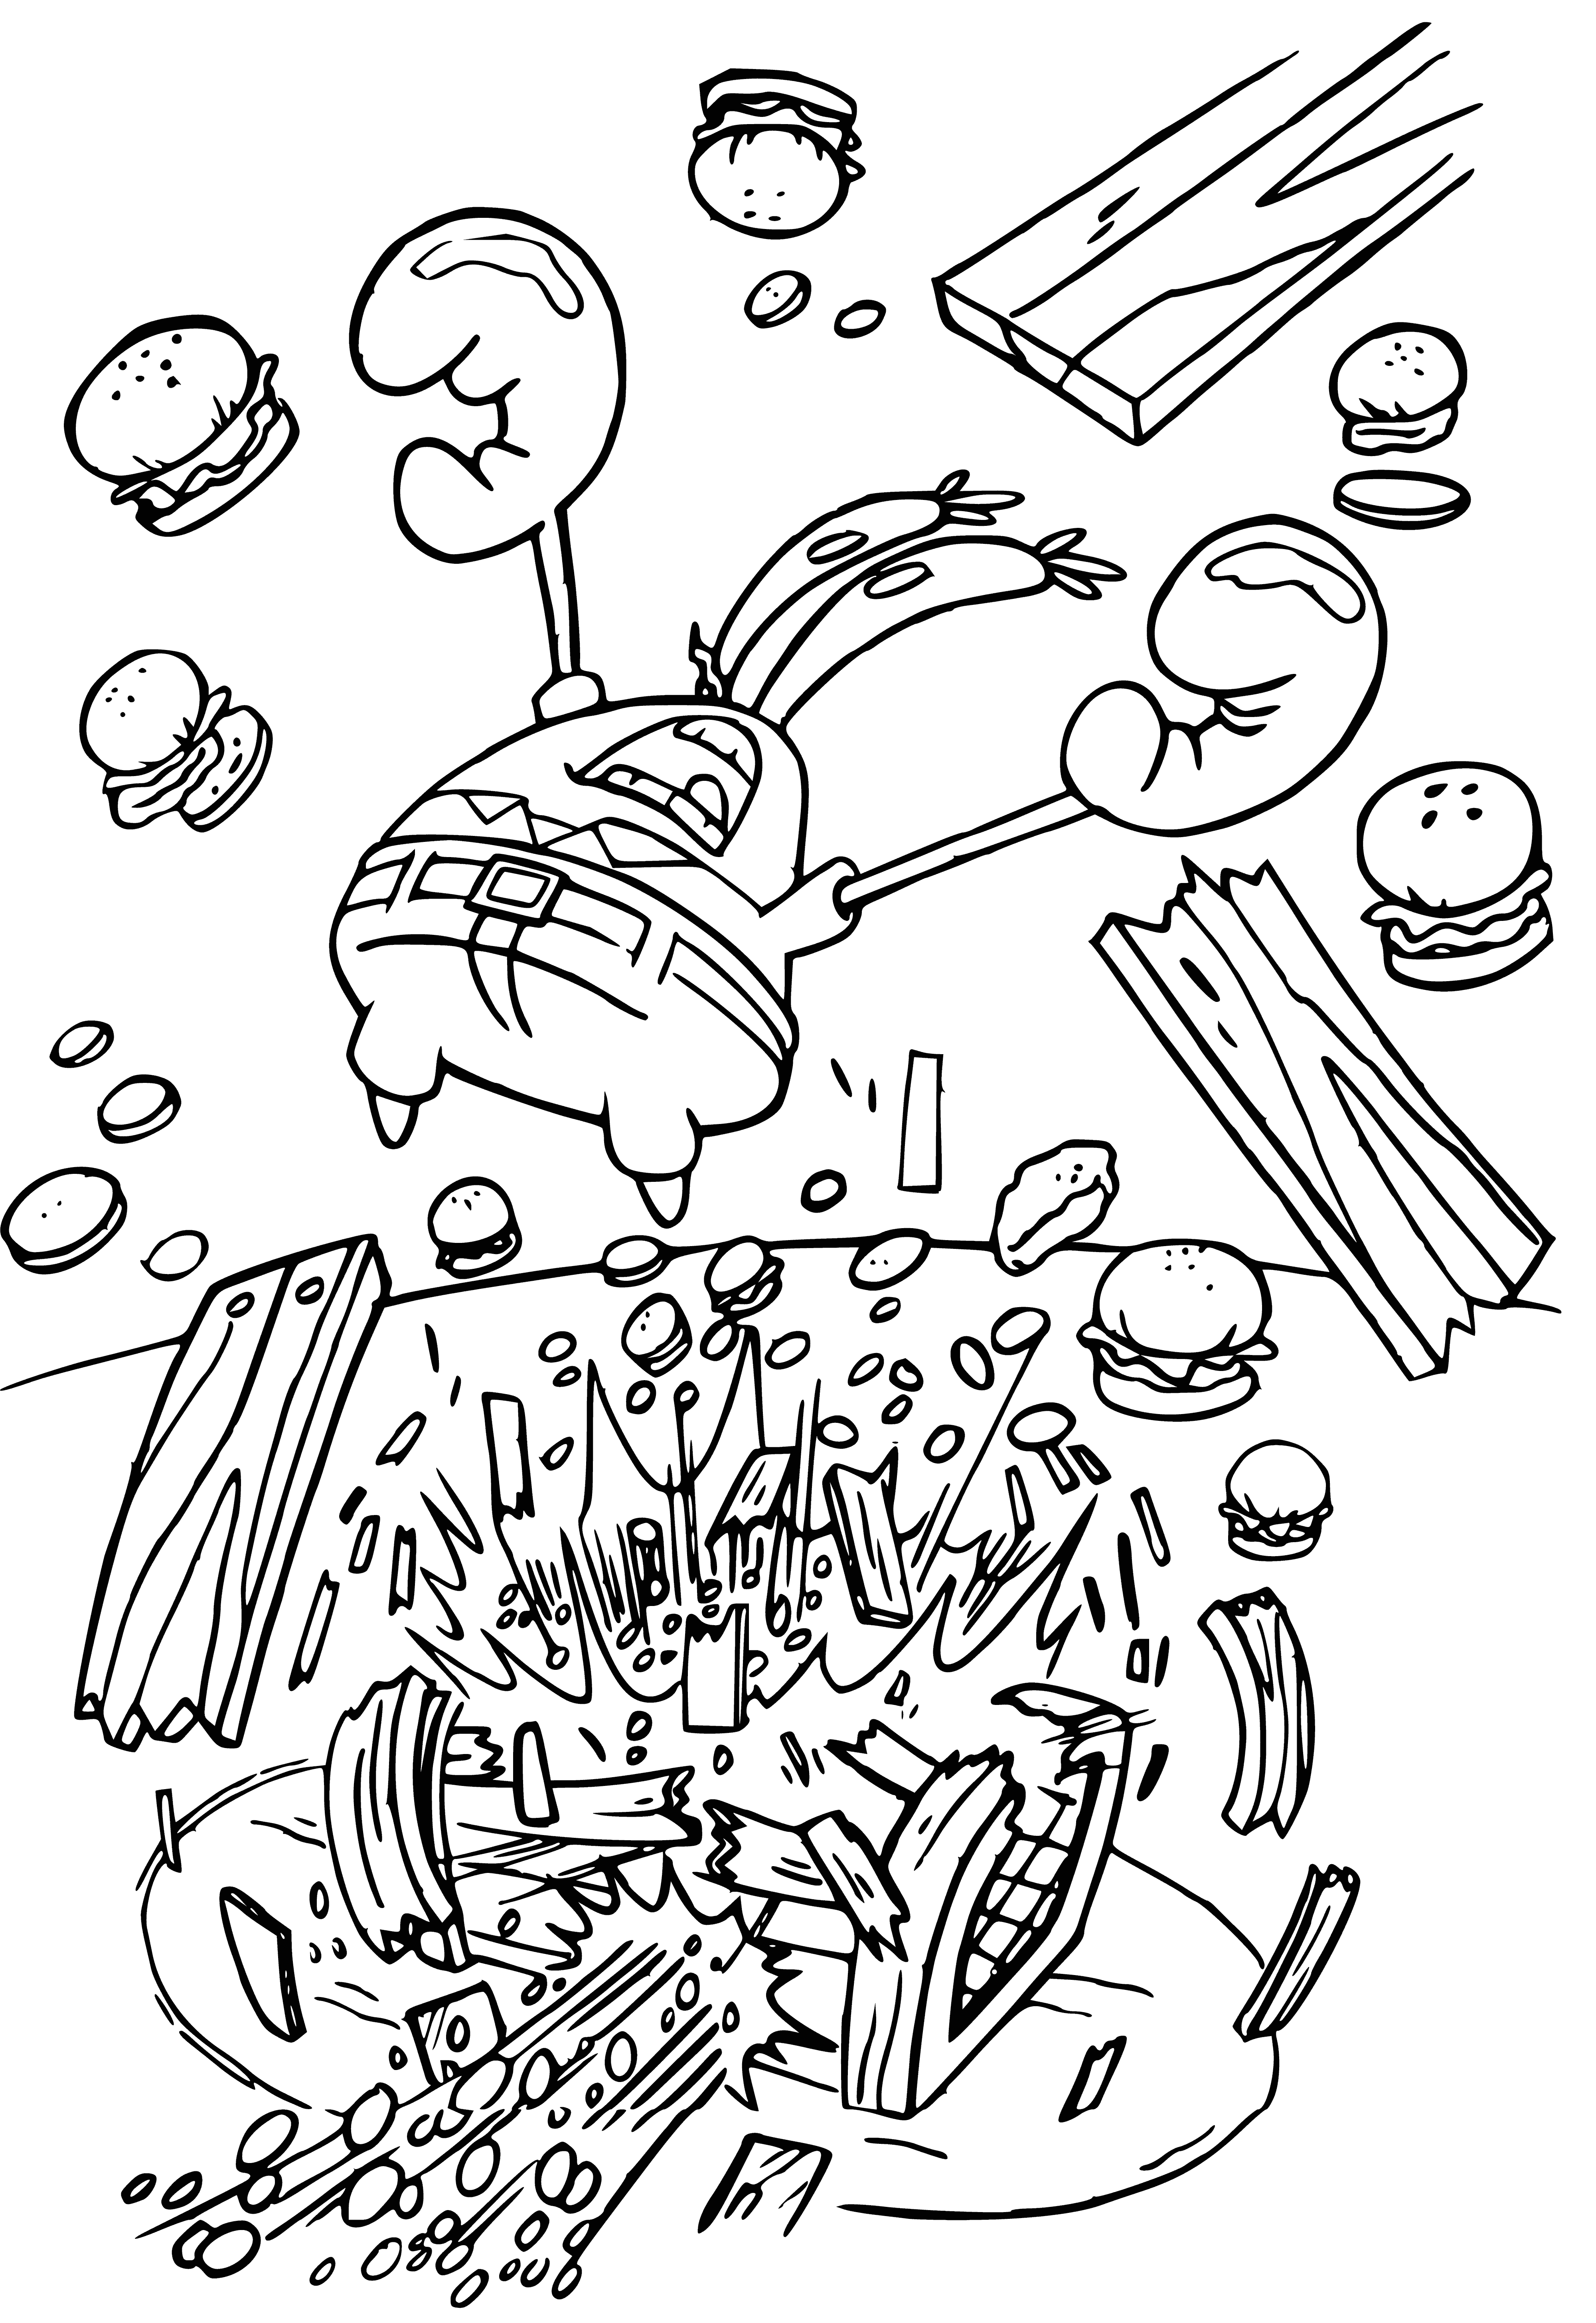 coloring page: Surprised Spongebob is surrounded by a fiery explosion in the center of this coloring page.